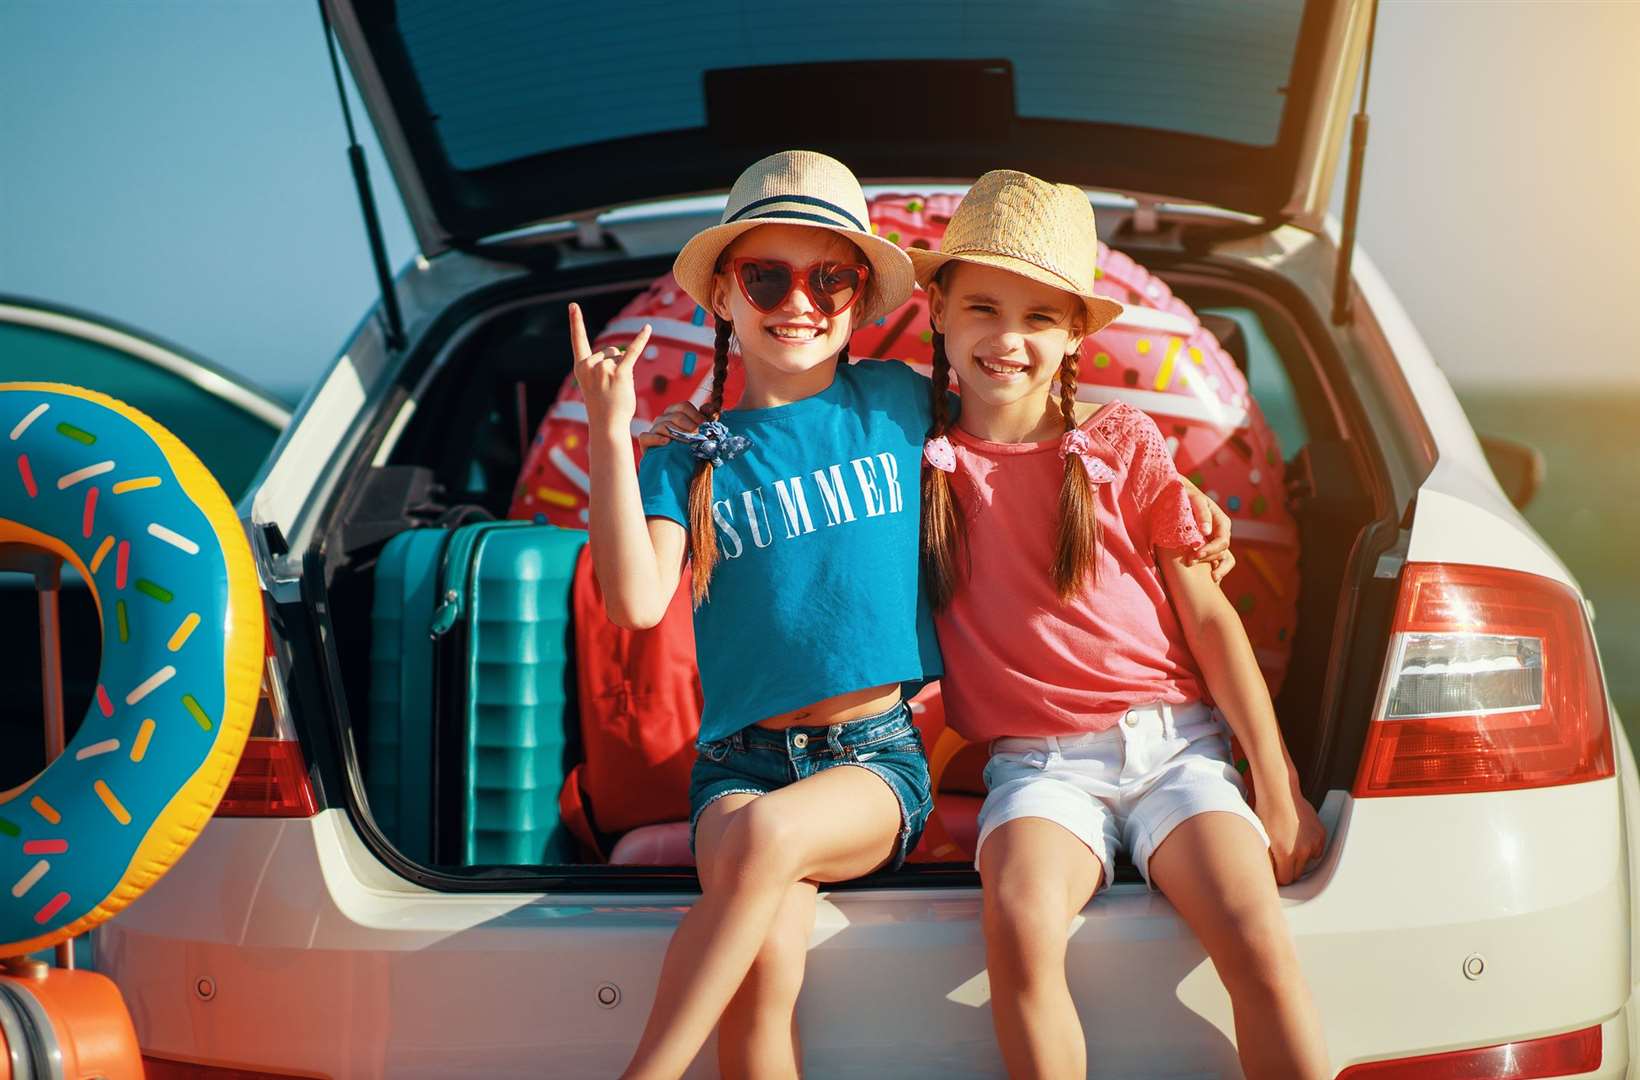 If you're filling up the car with the family's belongings a roof box or rack can be helpful